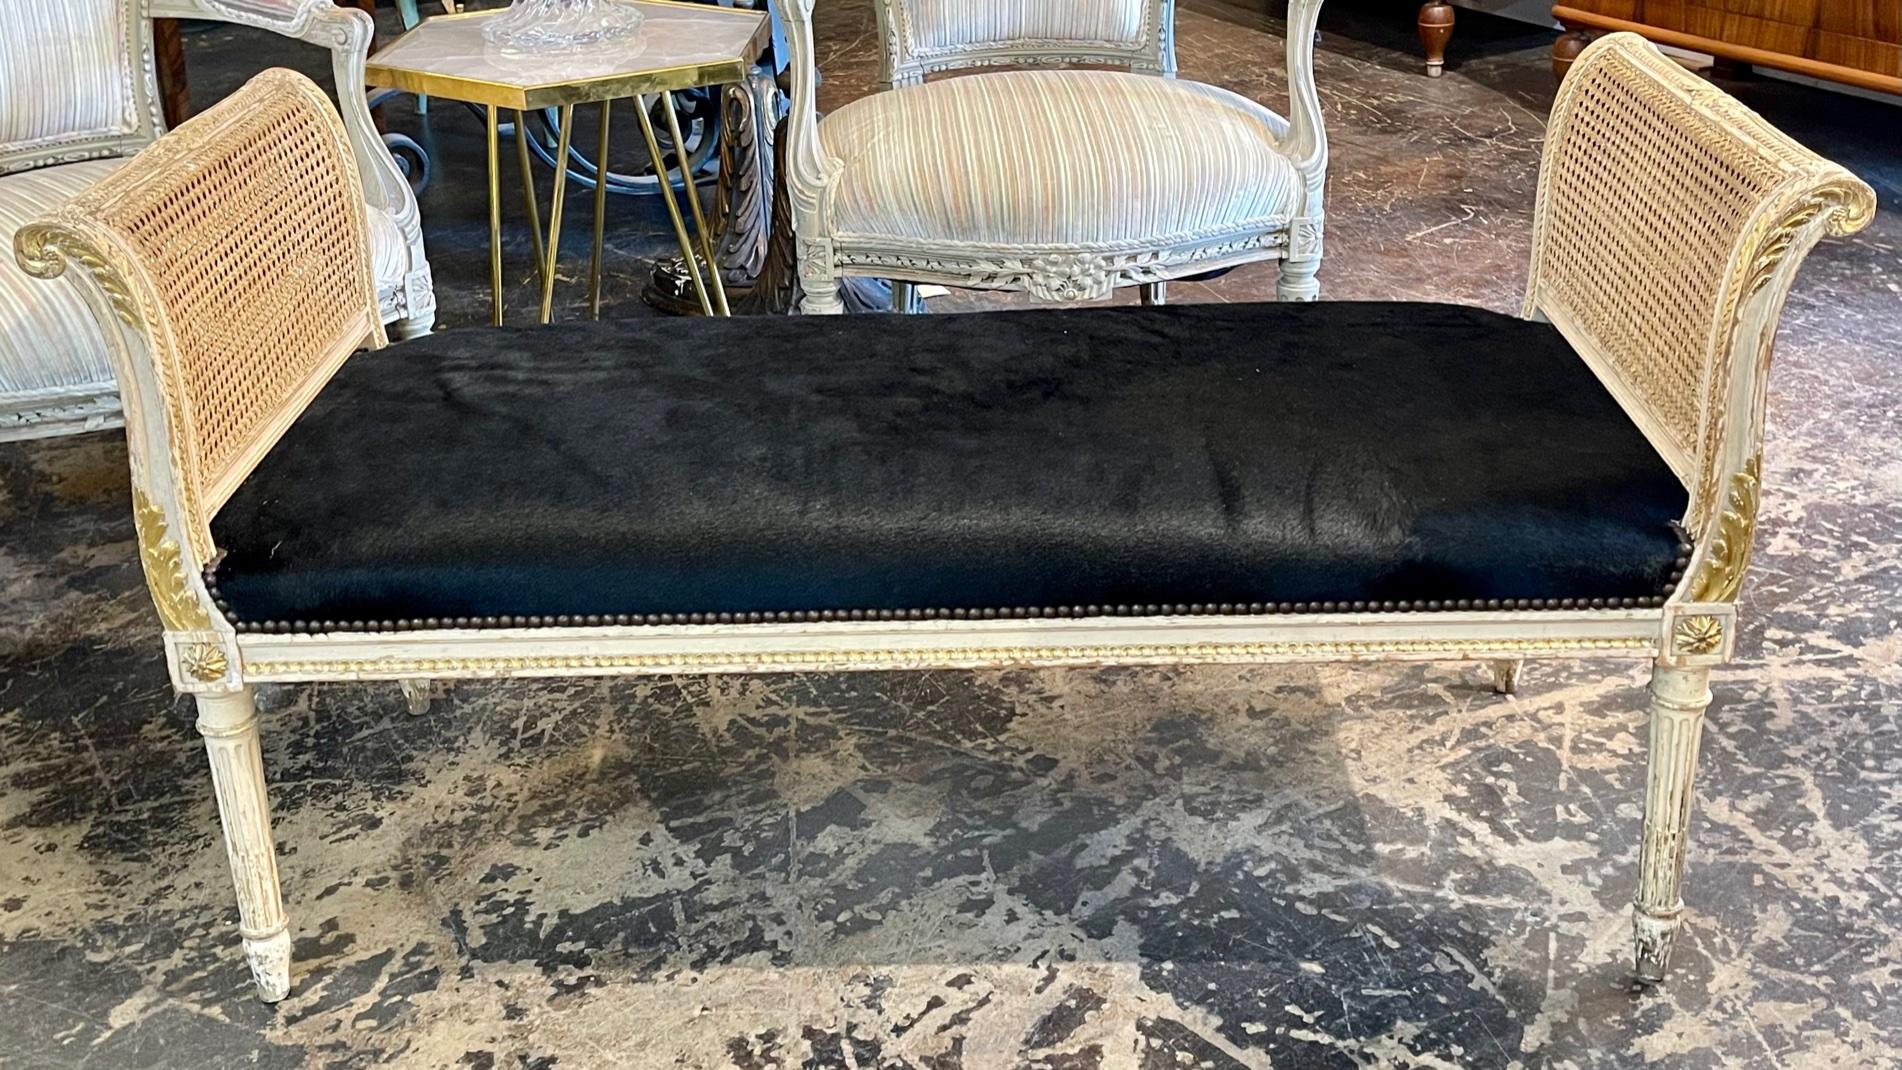 19th century French Louis XVI style carved and parcel gilt window bench with black cowhide. Circa 1870. Adds warmth and charm to any room.